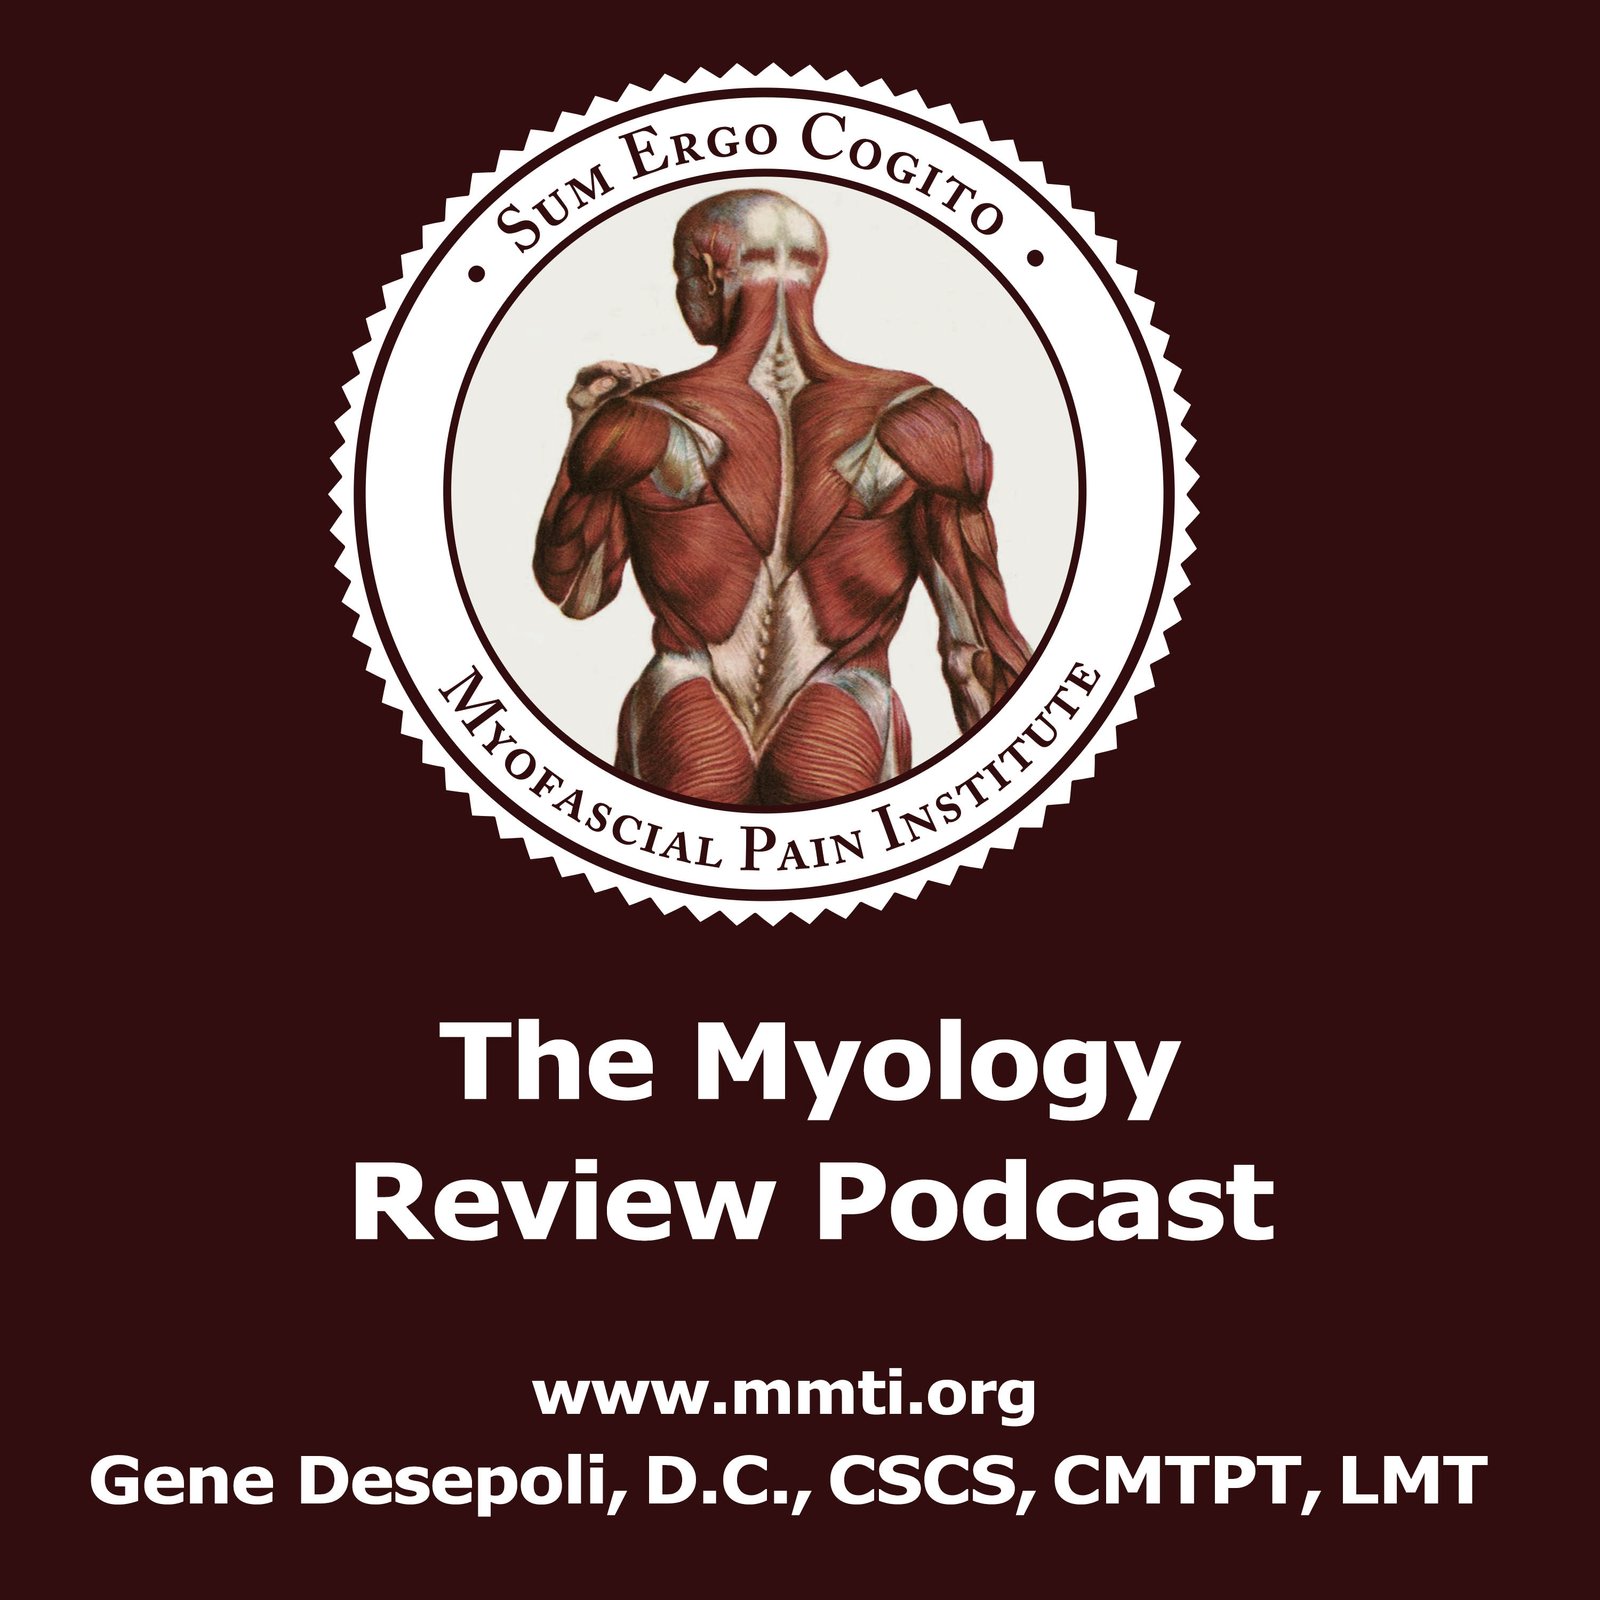 Myology Review Podcast – The Myofascial Pain Institute